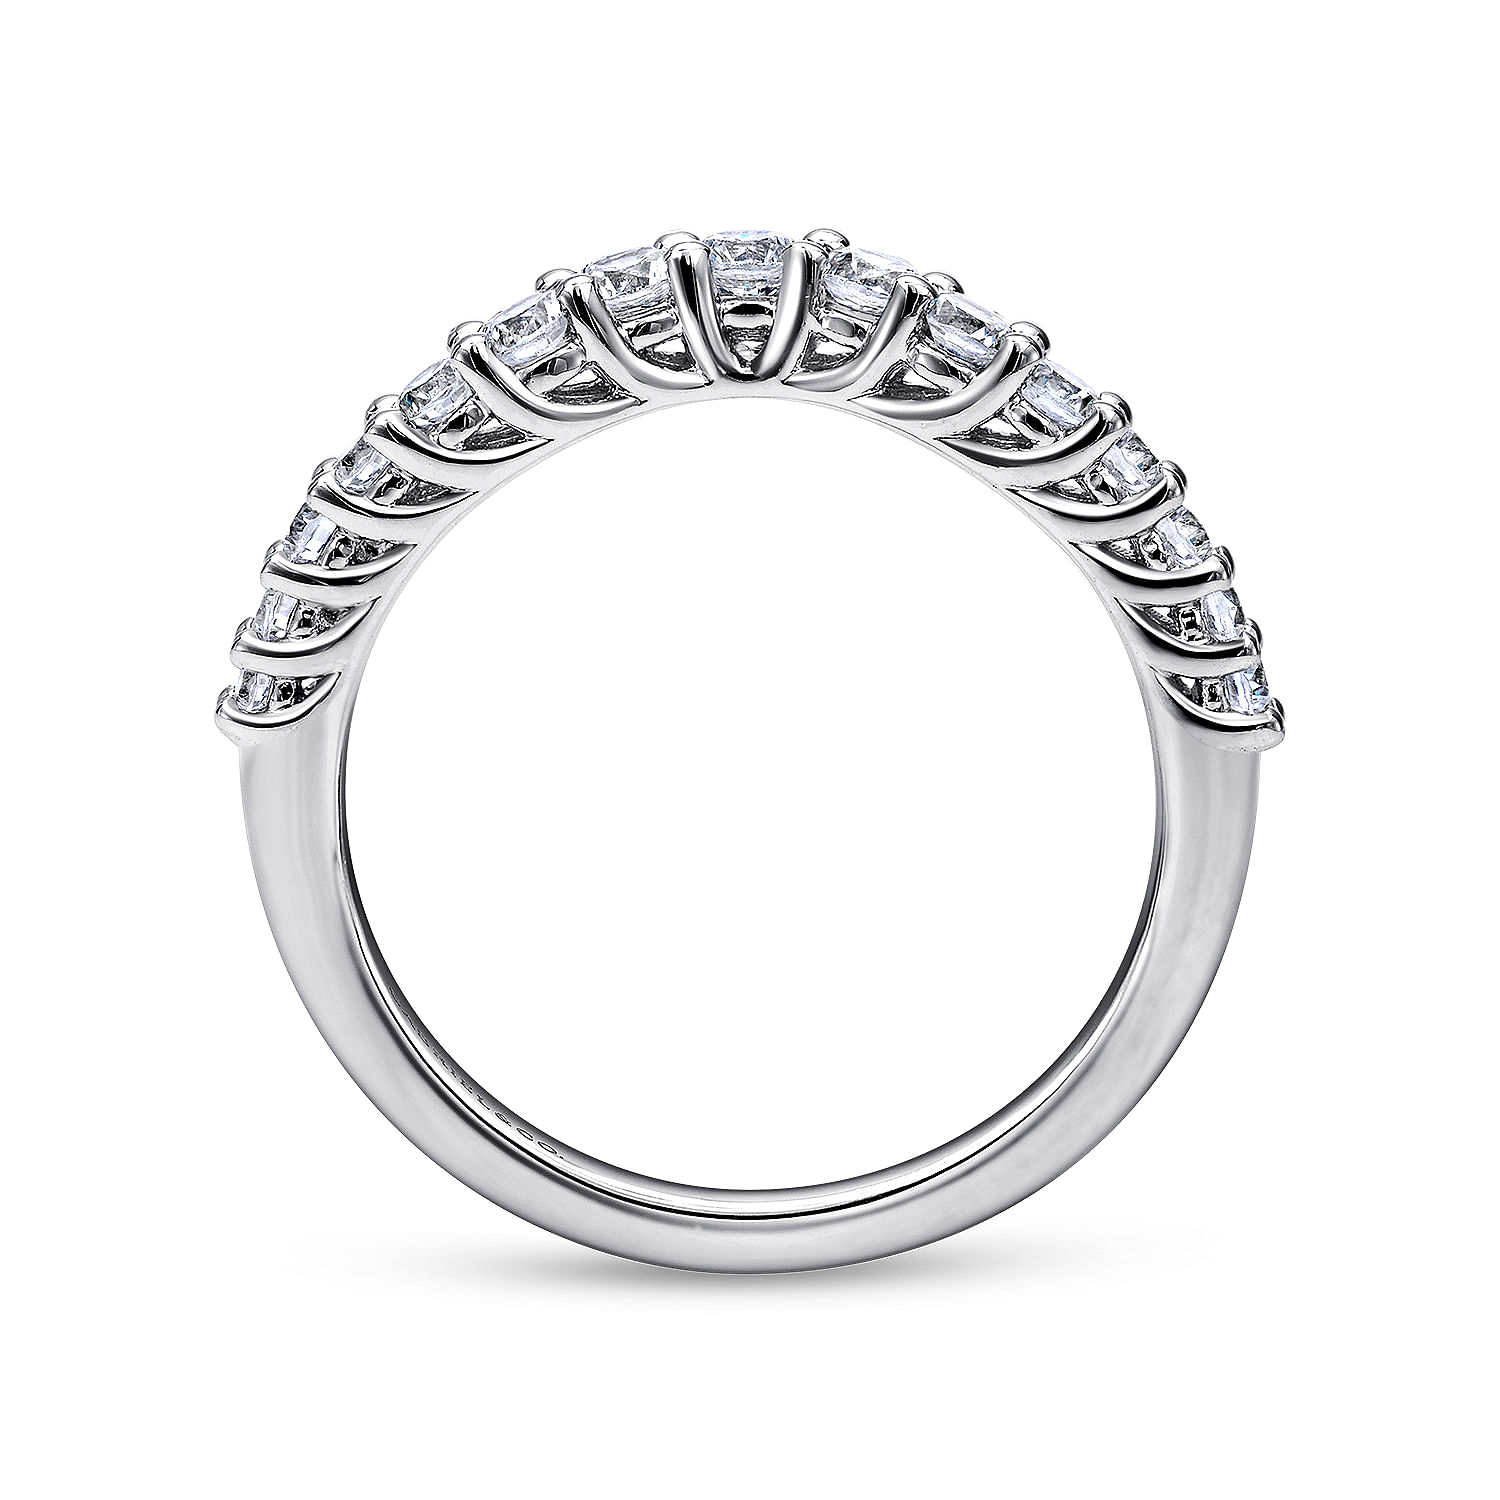 Curved 14K White Gold Shared Prong Diamond Wedding Band